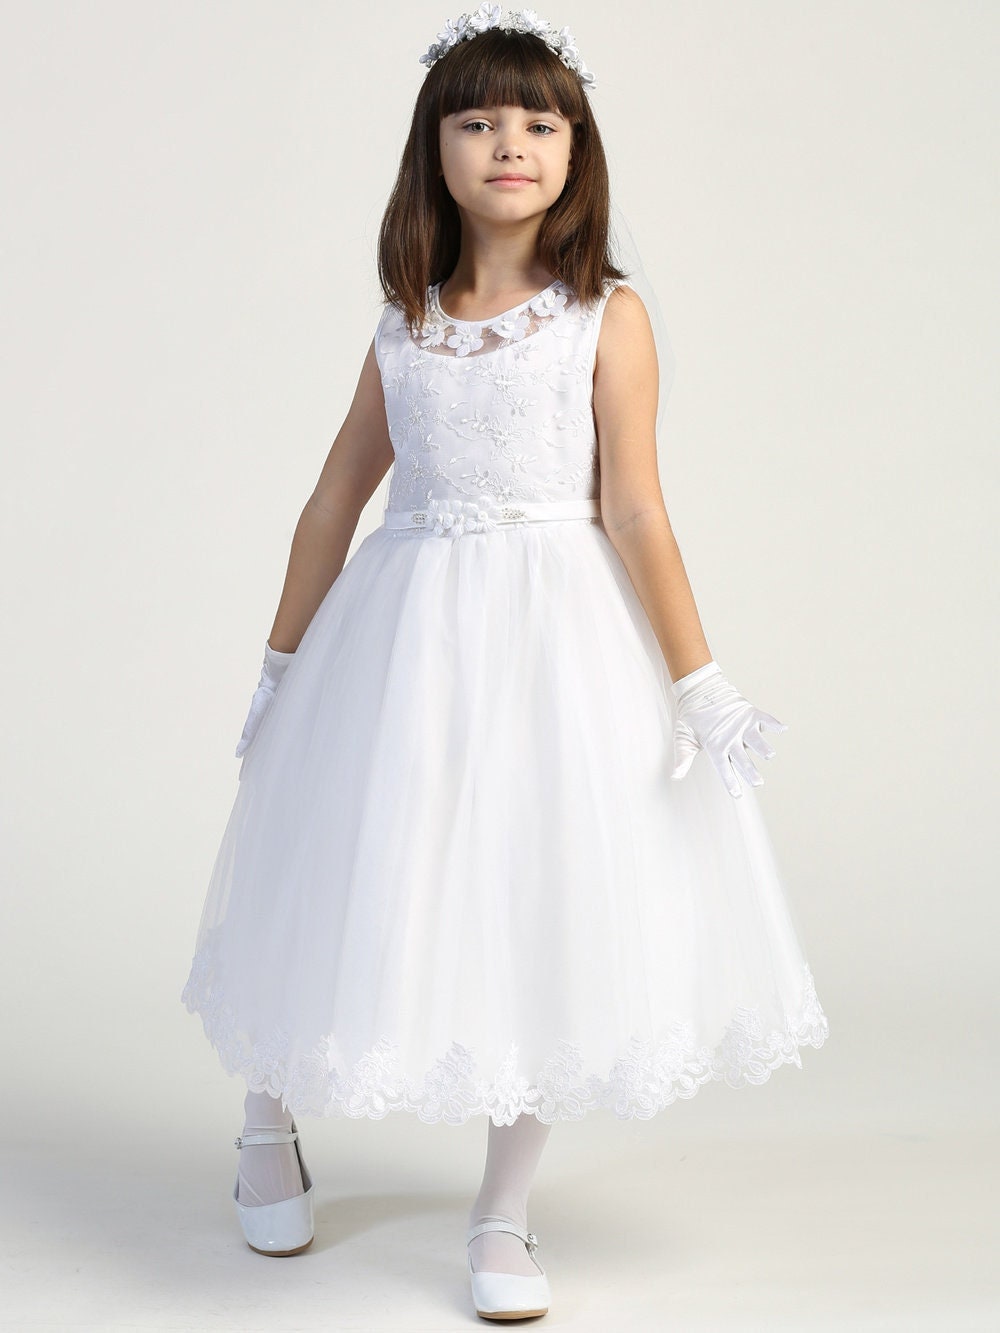 A girl wearing an elegant white First Communion Dress with an embroidered tulle bodice and flower appliques at the neckline.